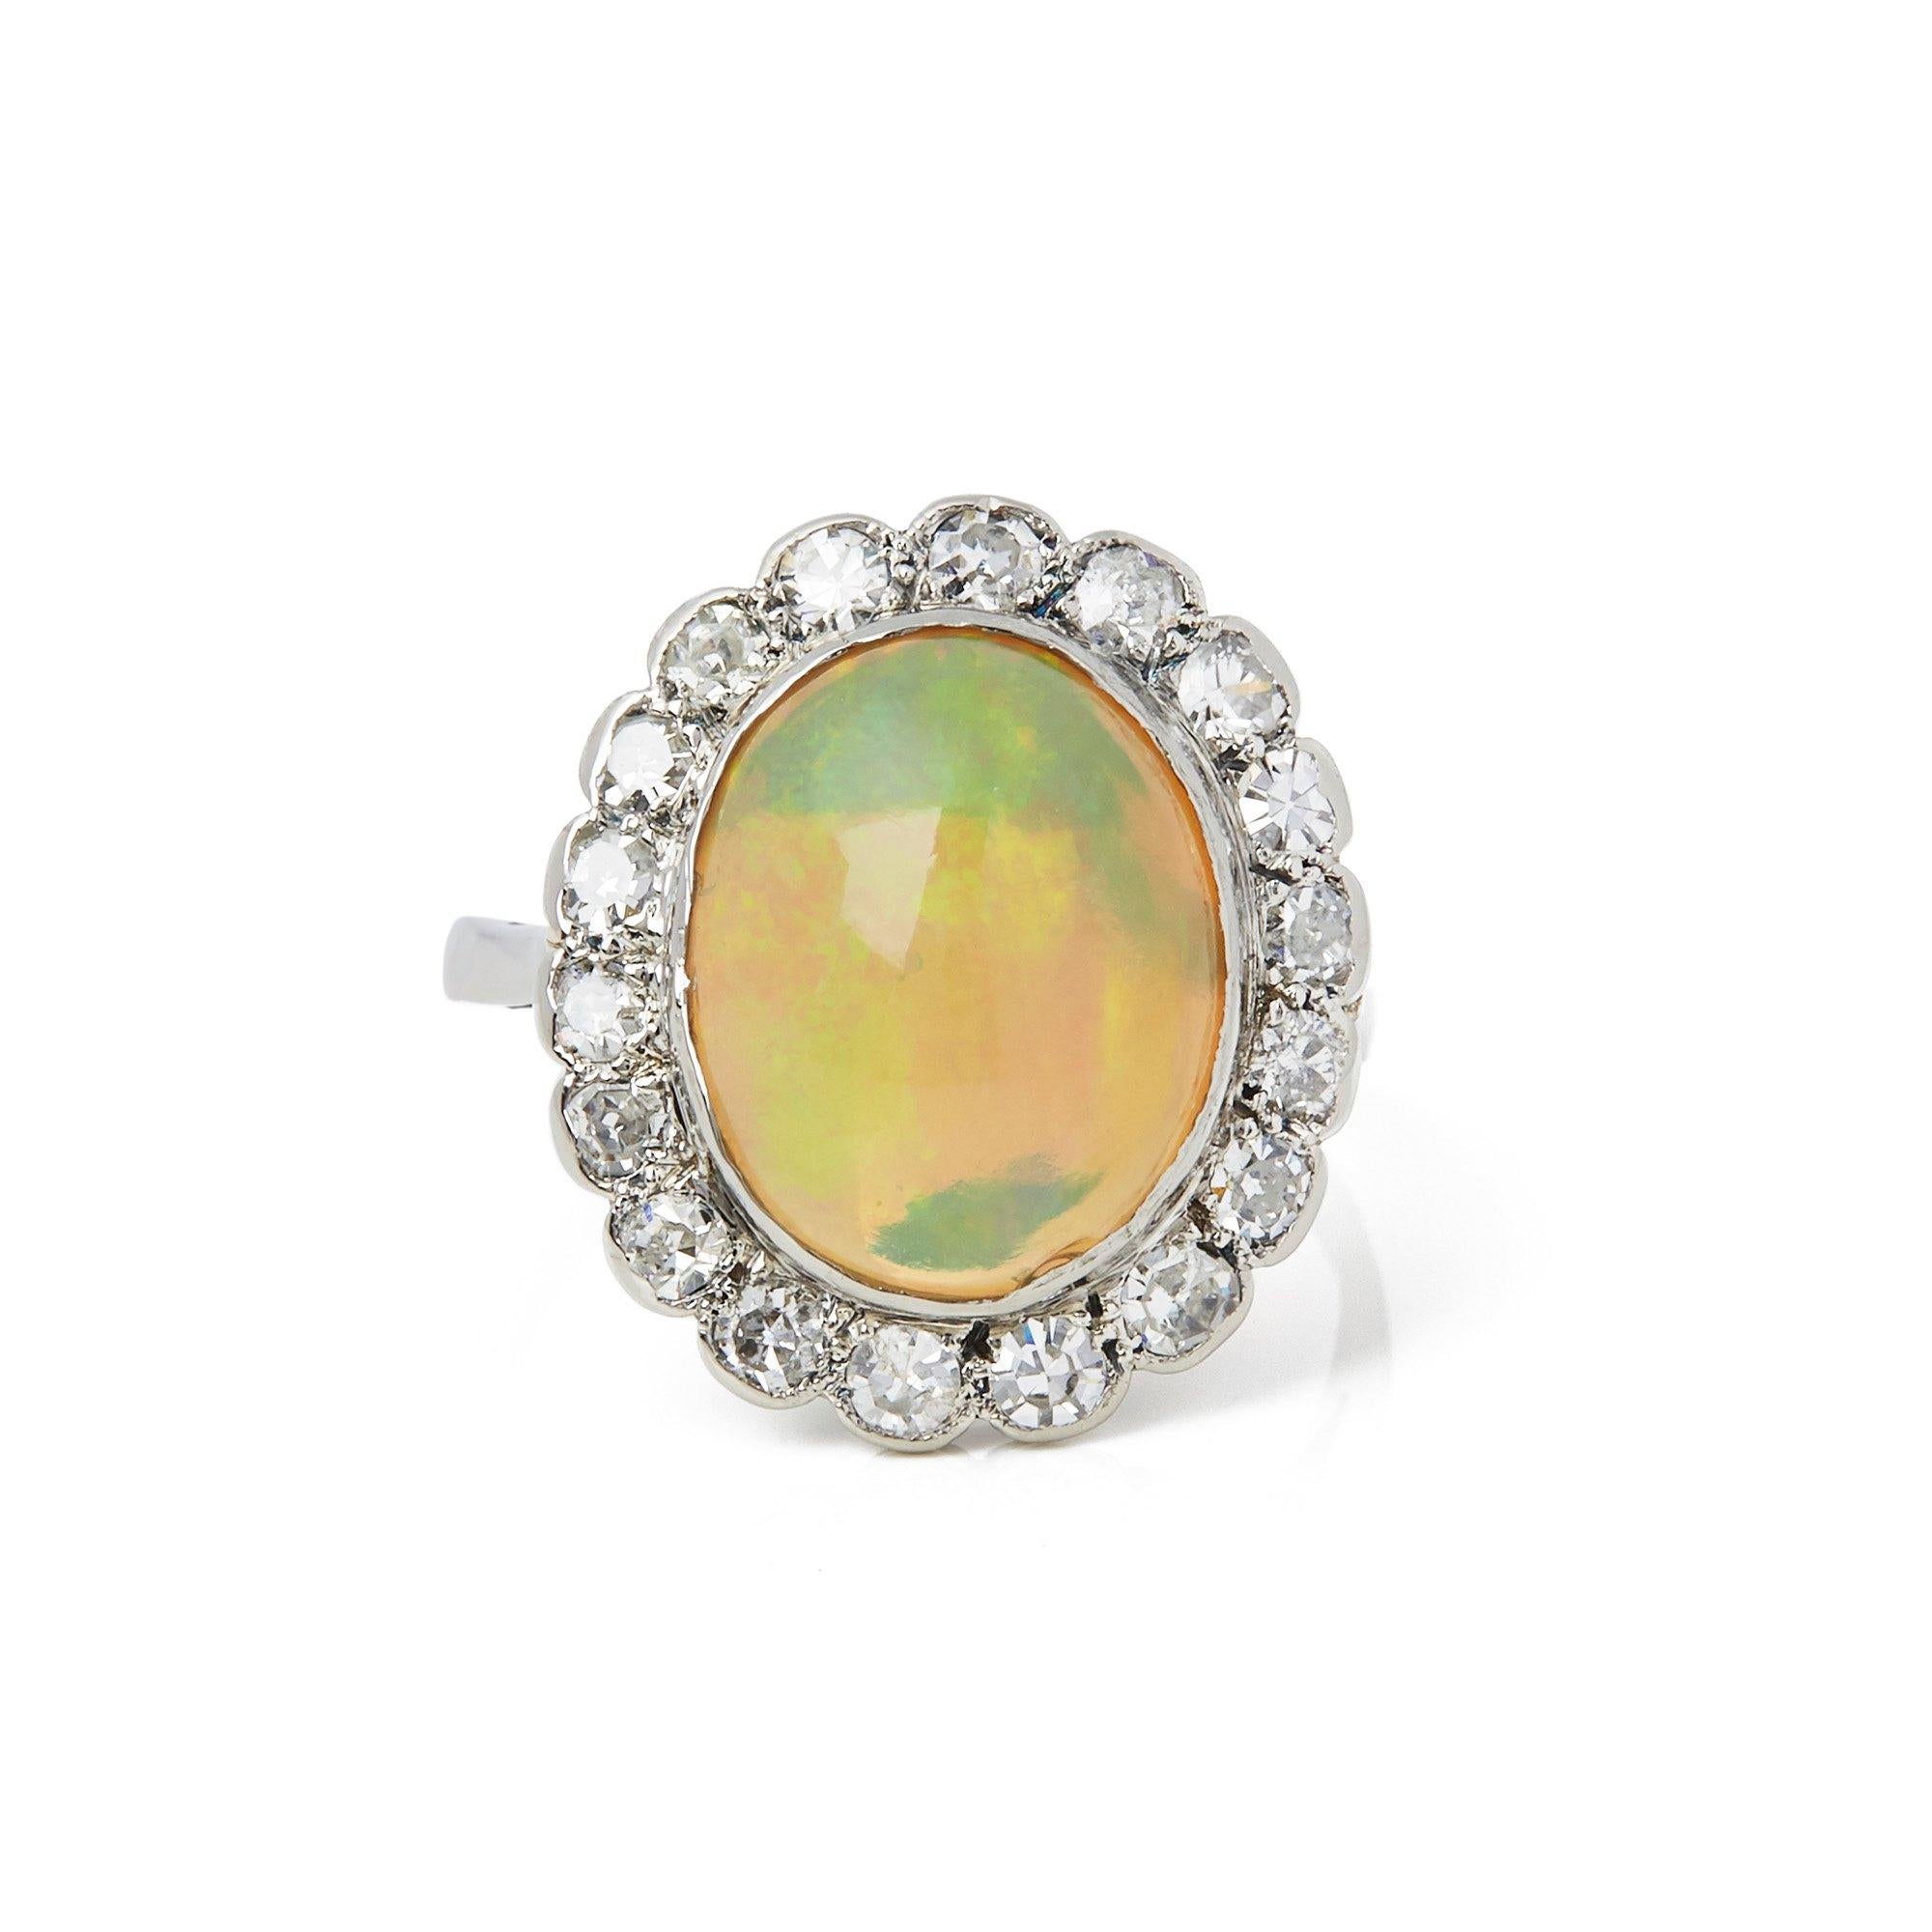 This Ring features One Oval Opal surrounded by Eighteen Round Brilliant Cut Diamonds totalling 1.26cts. Mounted in an 18k White Gold Claw Setting. Complete with Xupes Presentation Box. Our Xupes reference is COMJ232 should you need to quote this.